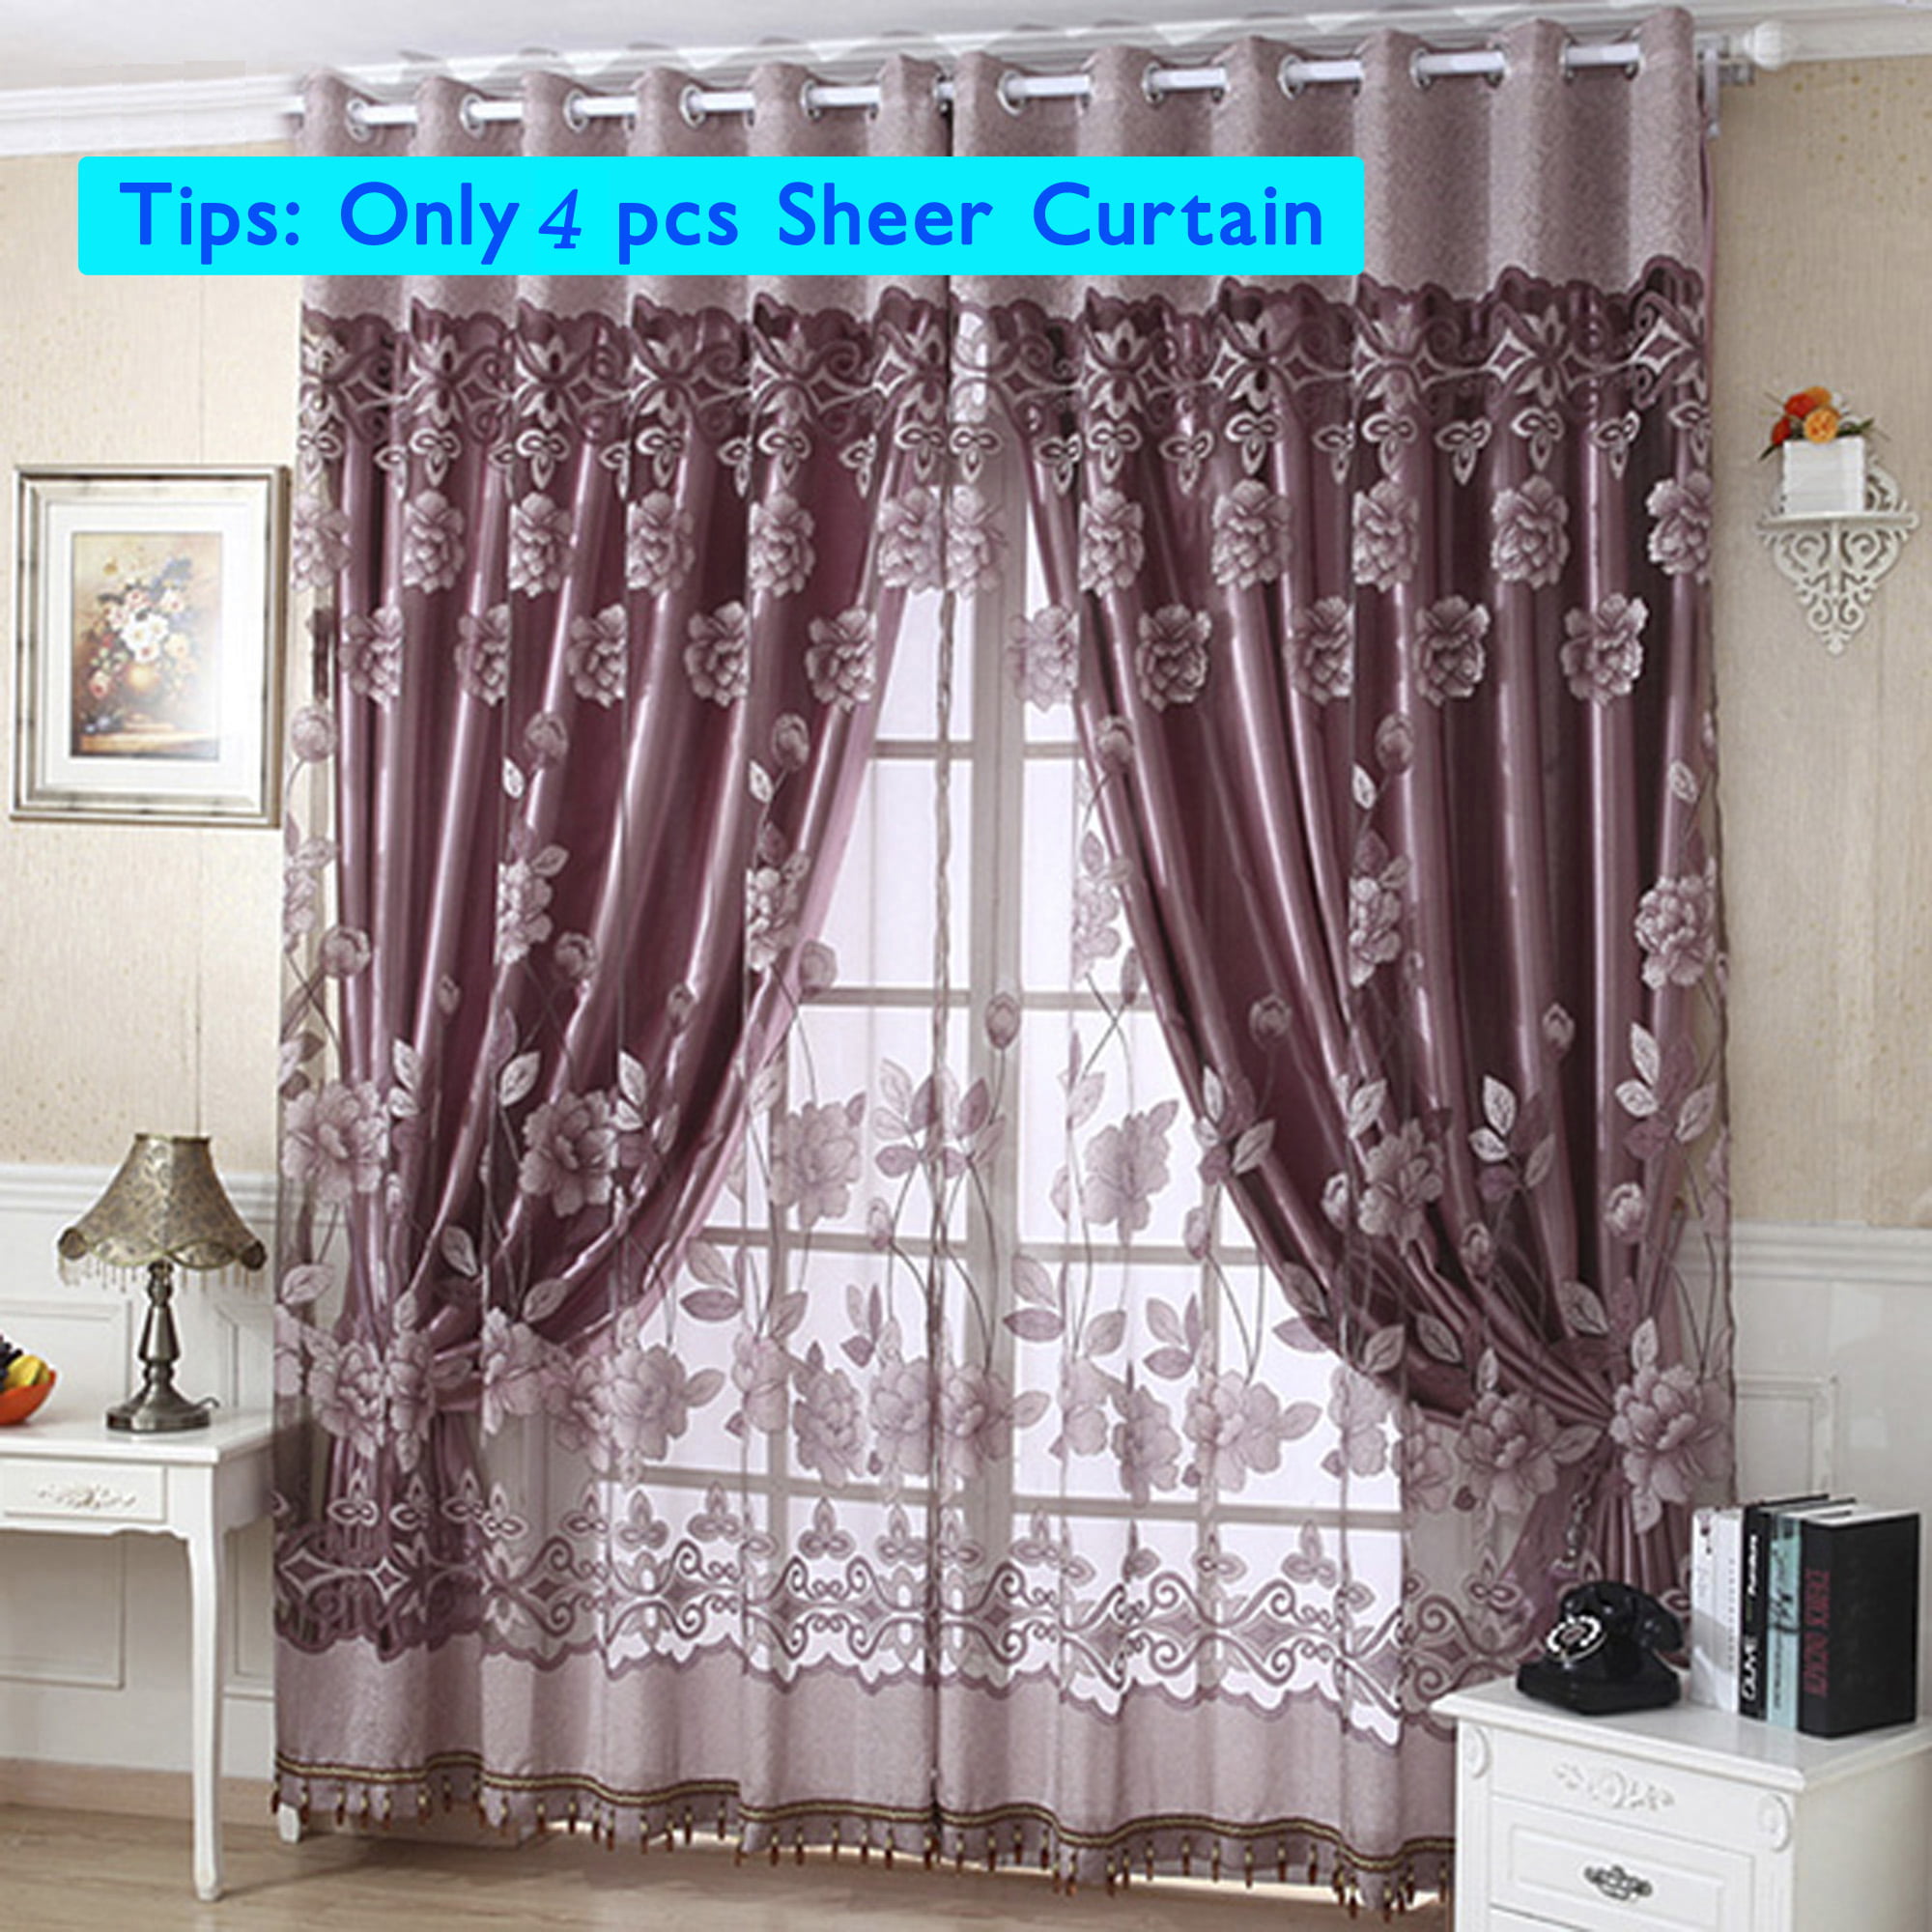 New Floral Tulle Voile Door Window Curtain Drape Panel Sheer Scarf Valances 